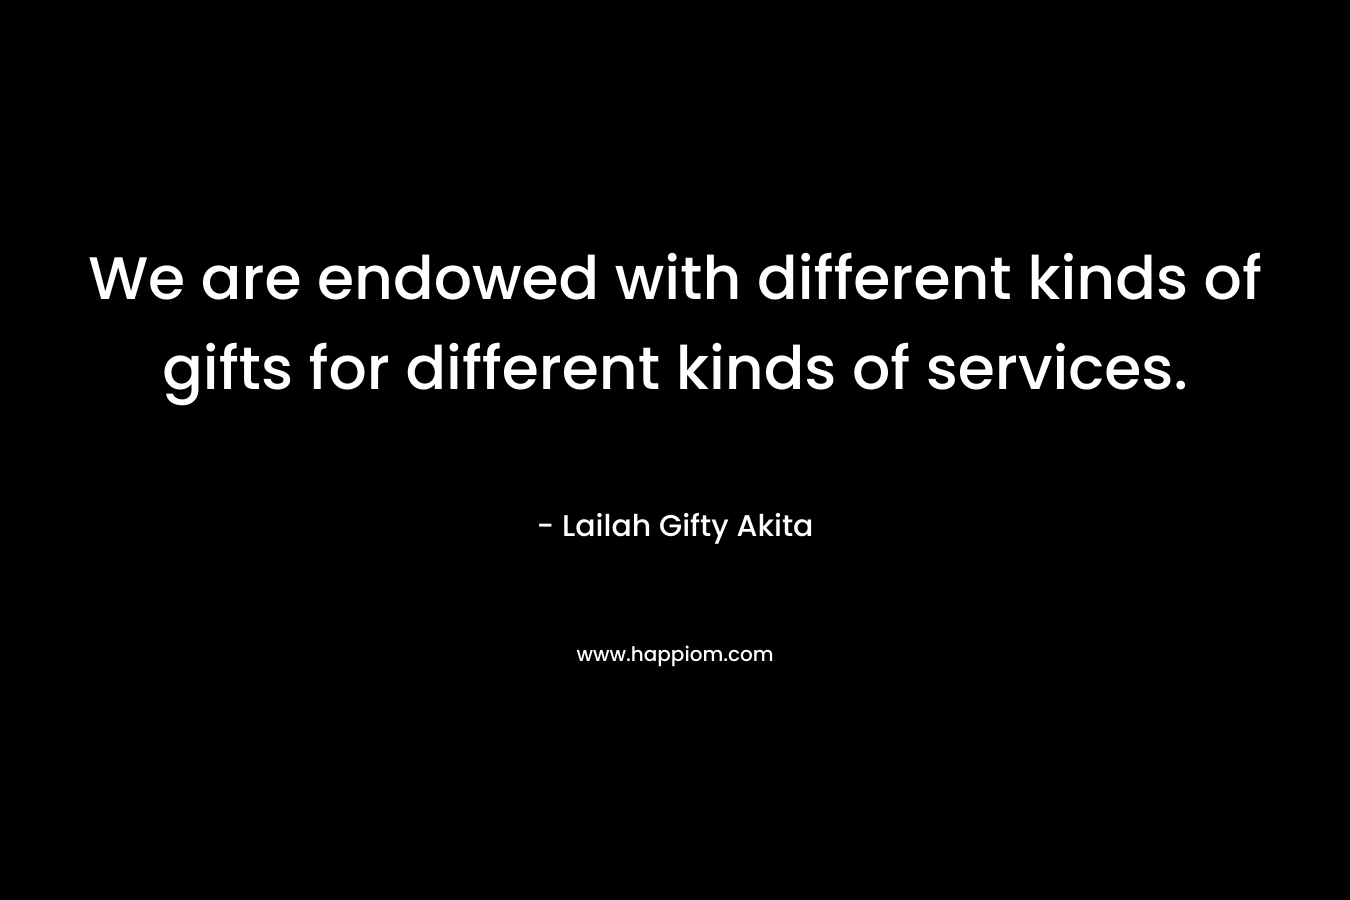 We are endowed with different kinds of gifts for different kinds of services. – Lailah Gifty Akita